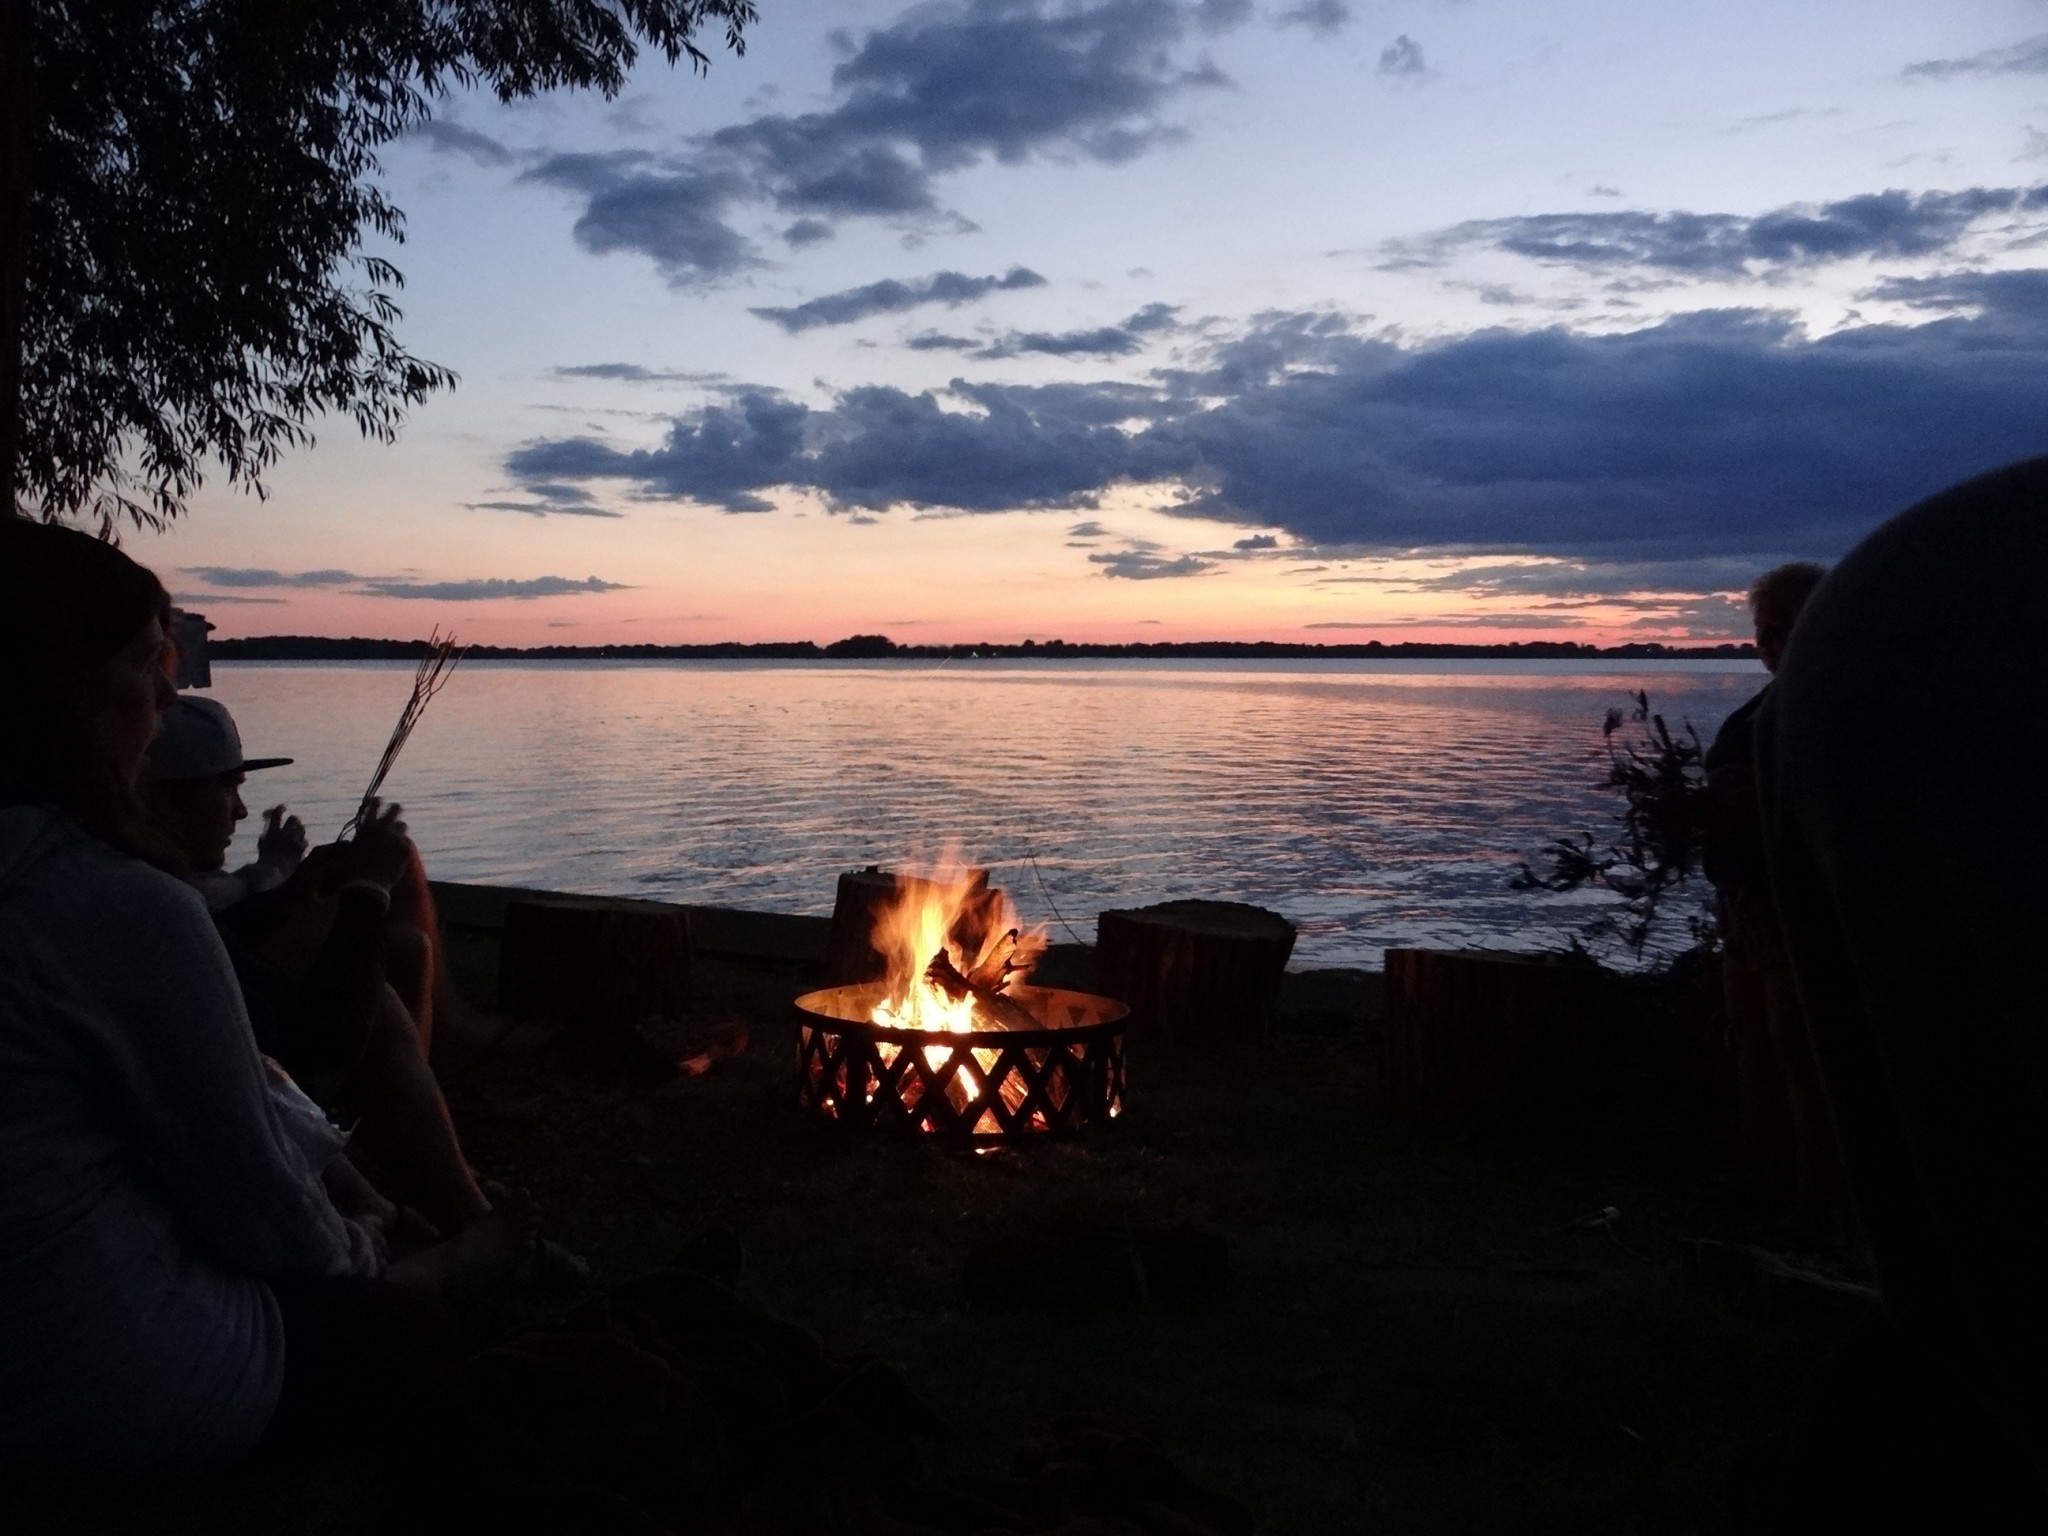 Campfire by Lake. Photo by Greg Wagner.